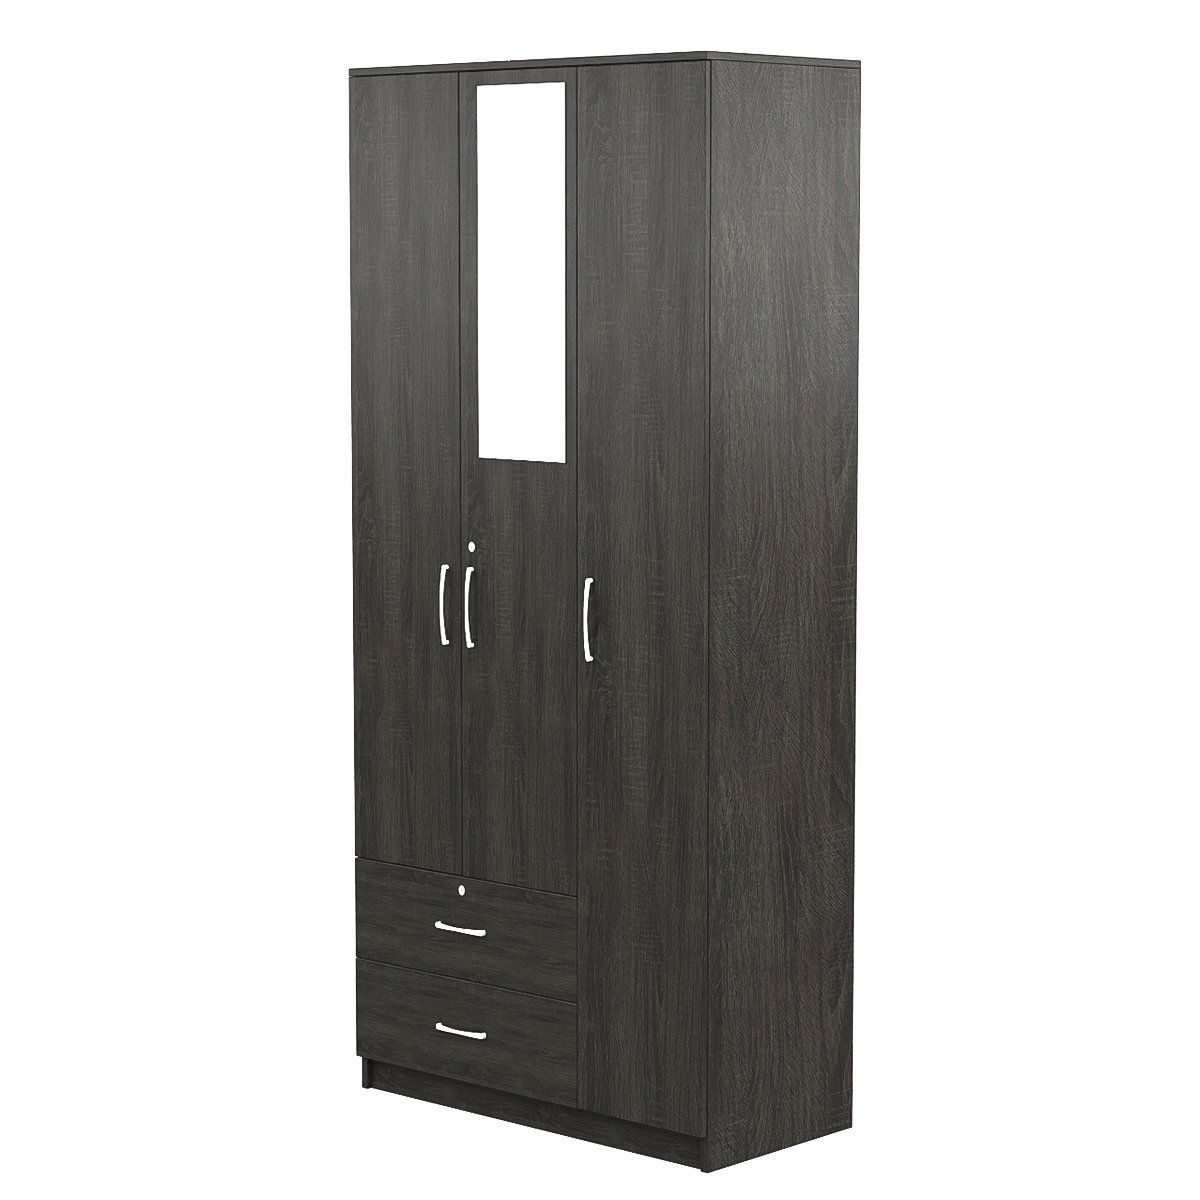 Most Up To Date Wardrobe: Buy Bedroom Wardrobes Online At Best Prices In India For Low Cost Wardrobes (View 7 of 15)